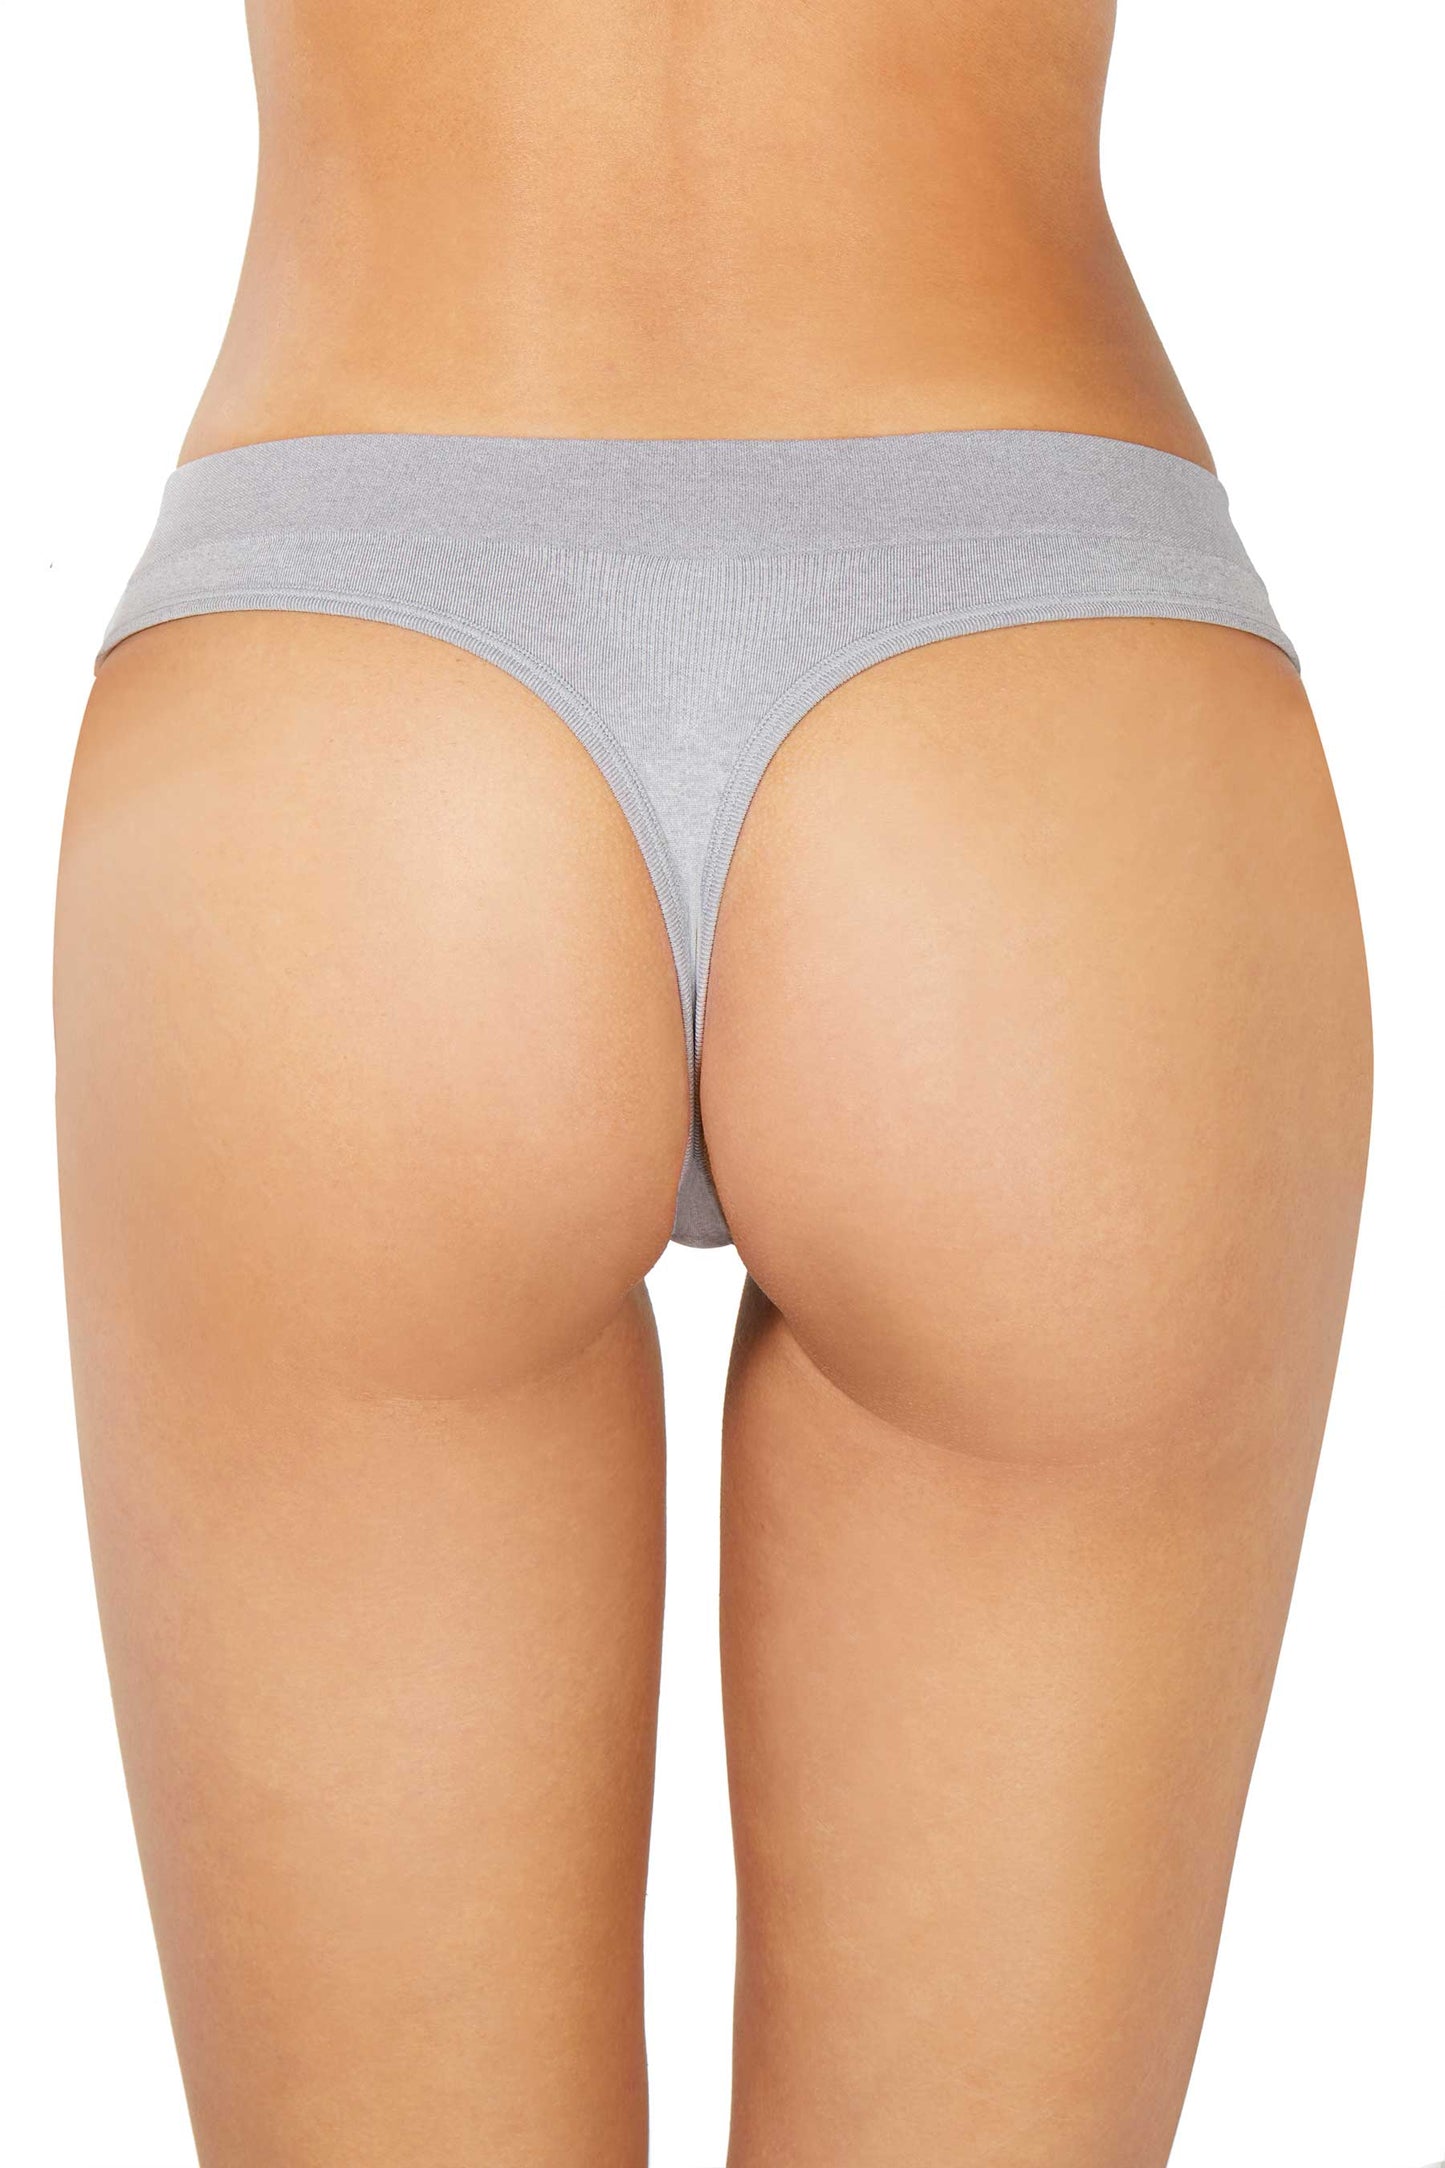 Low Hide Thong in Heather Grey